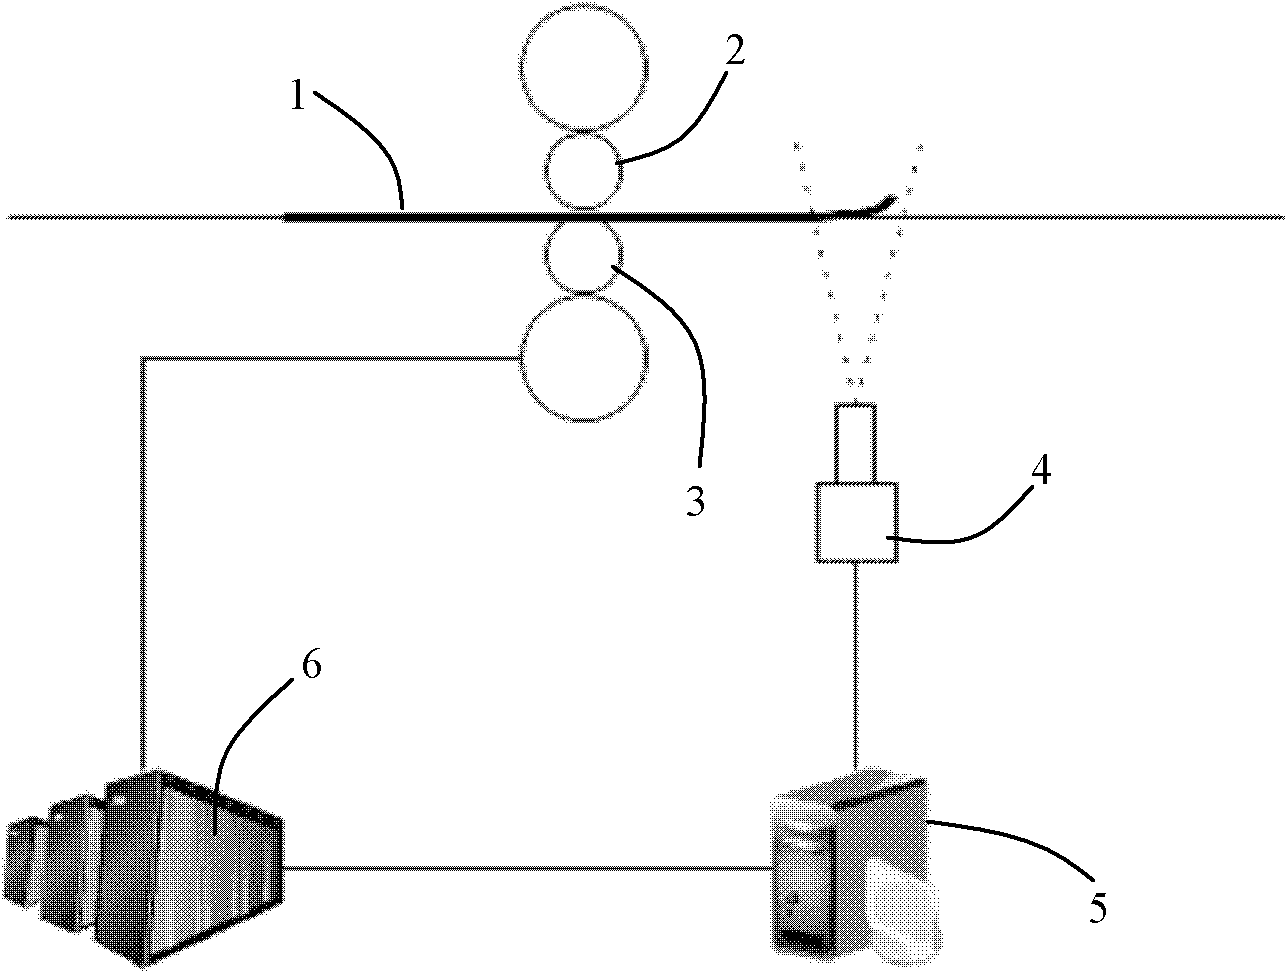 Control method for upward and downward head bending of plate blank